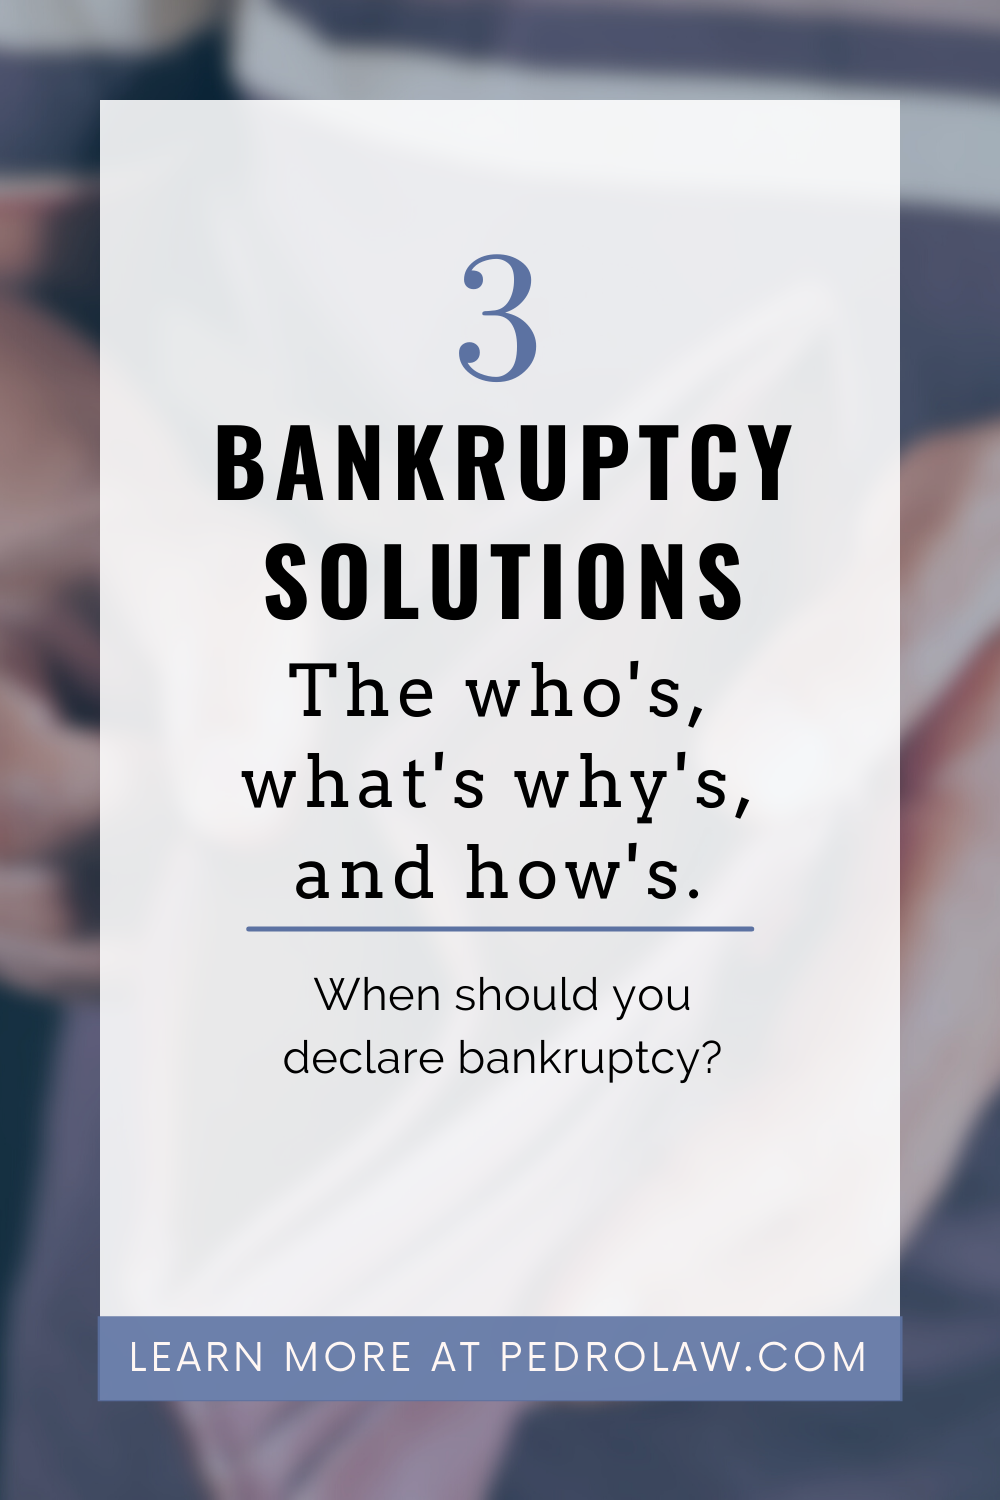 3 solutions for declaring bankruptcy.